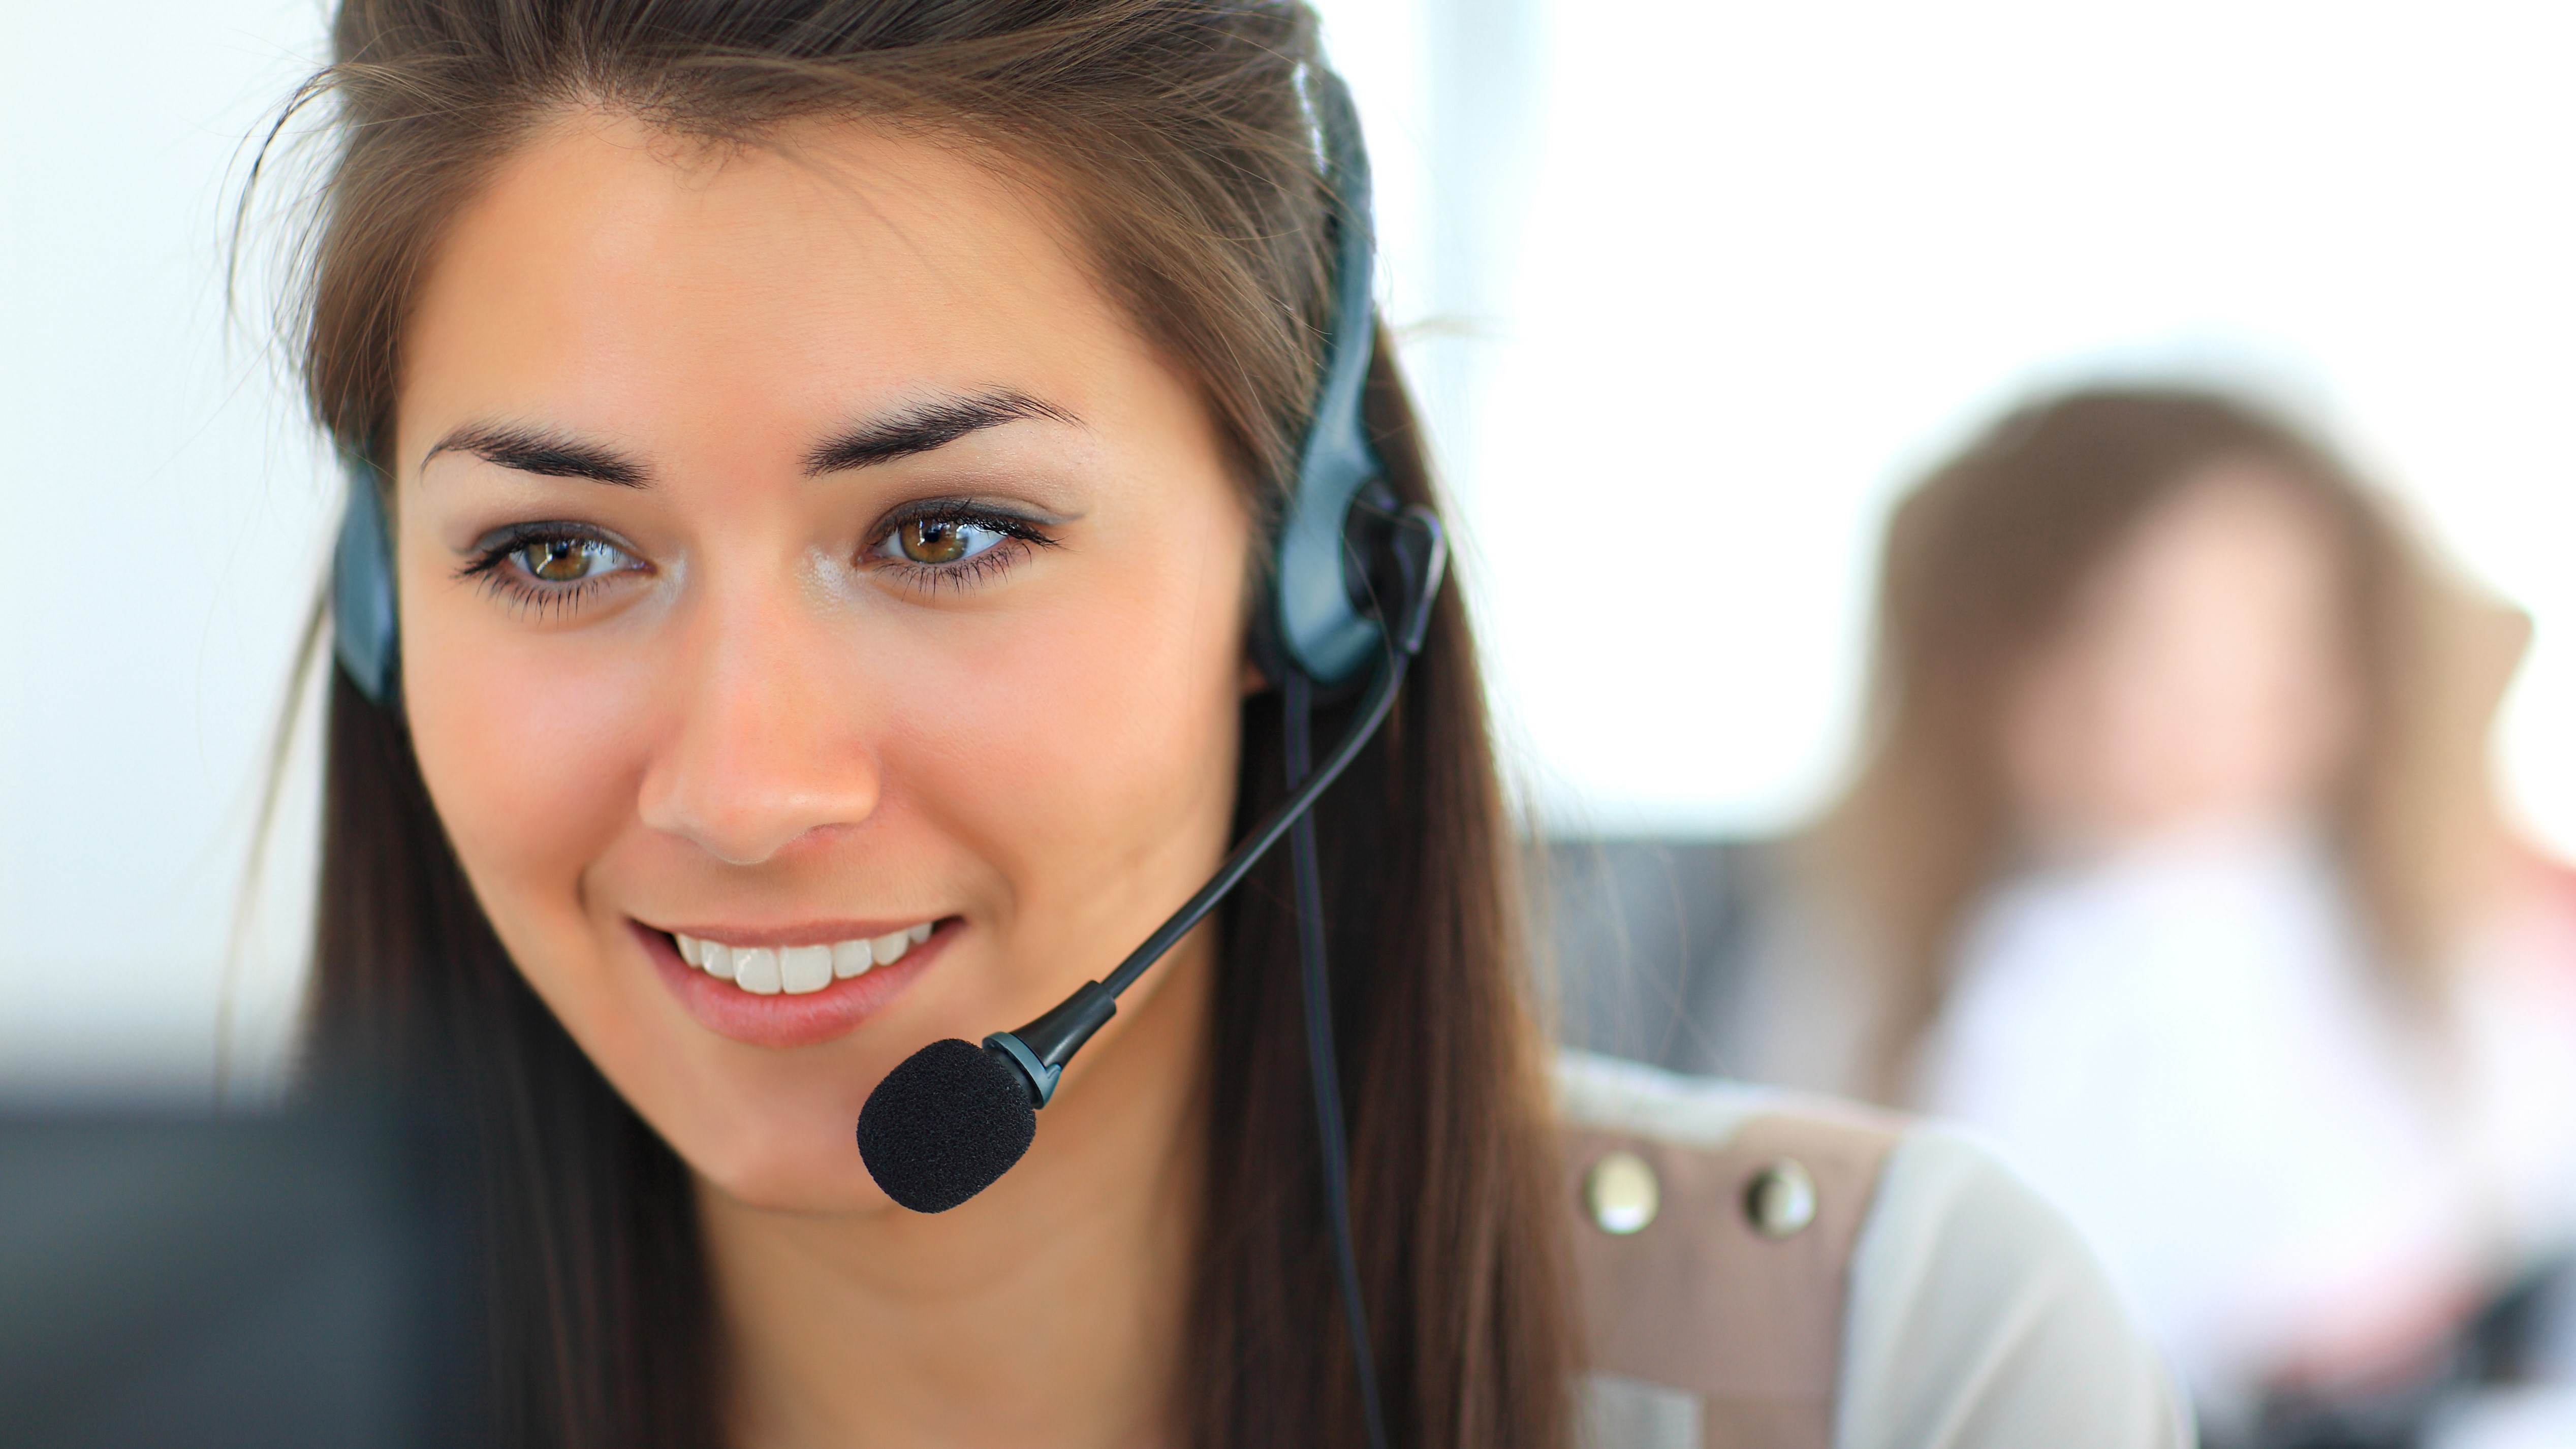 A close up on a woman working at a computer, wearing a headset and smiling